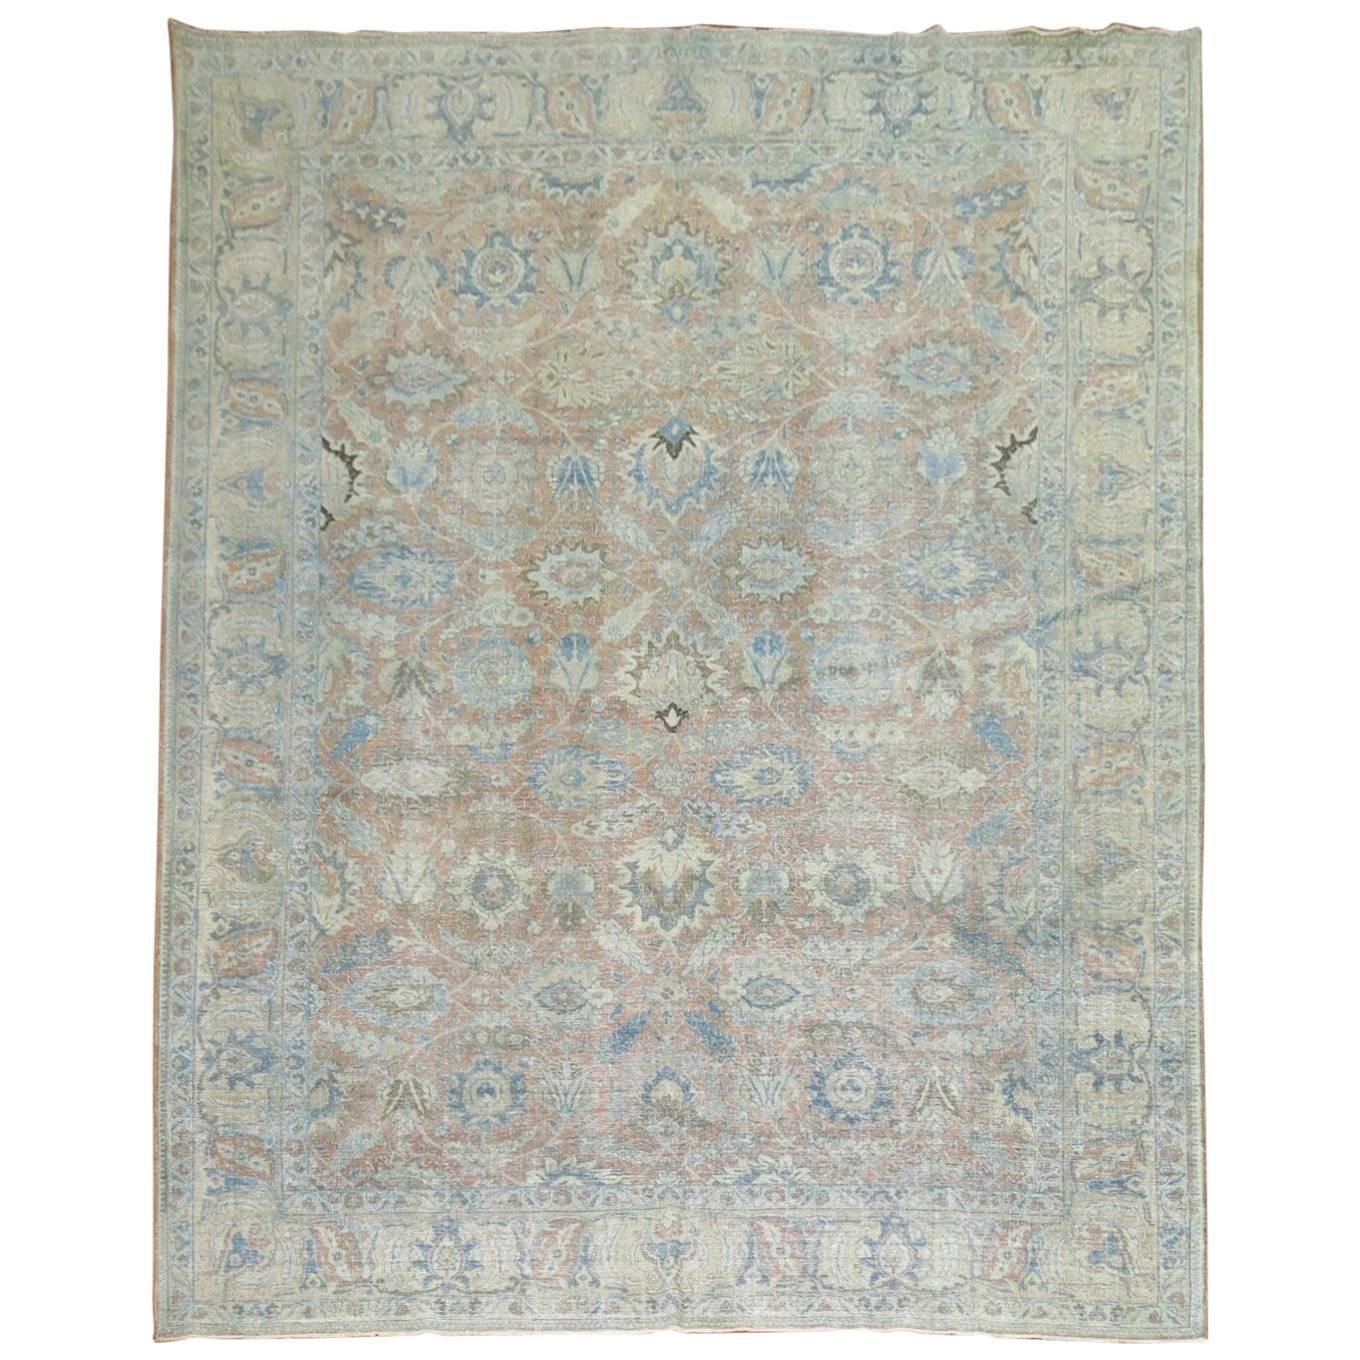 Soft Blue and Terracotta Antique Persian Tabriz Rug , Early 20th century For Sale